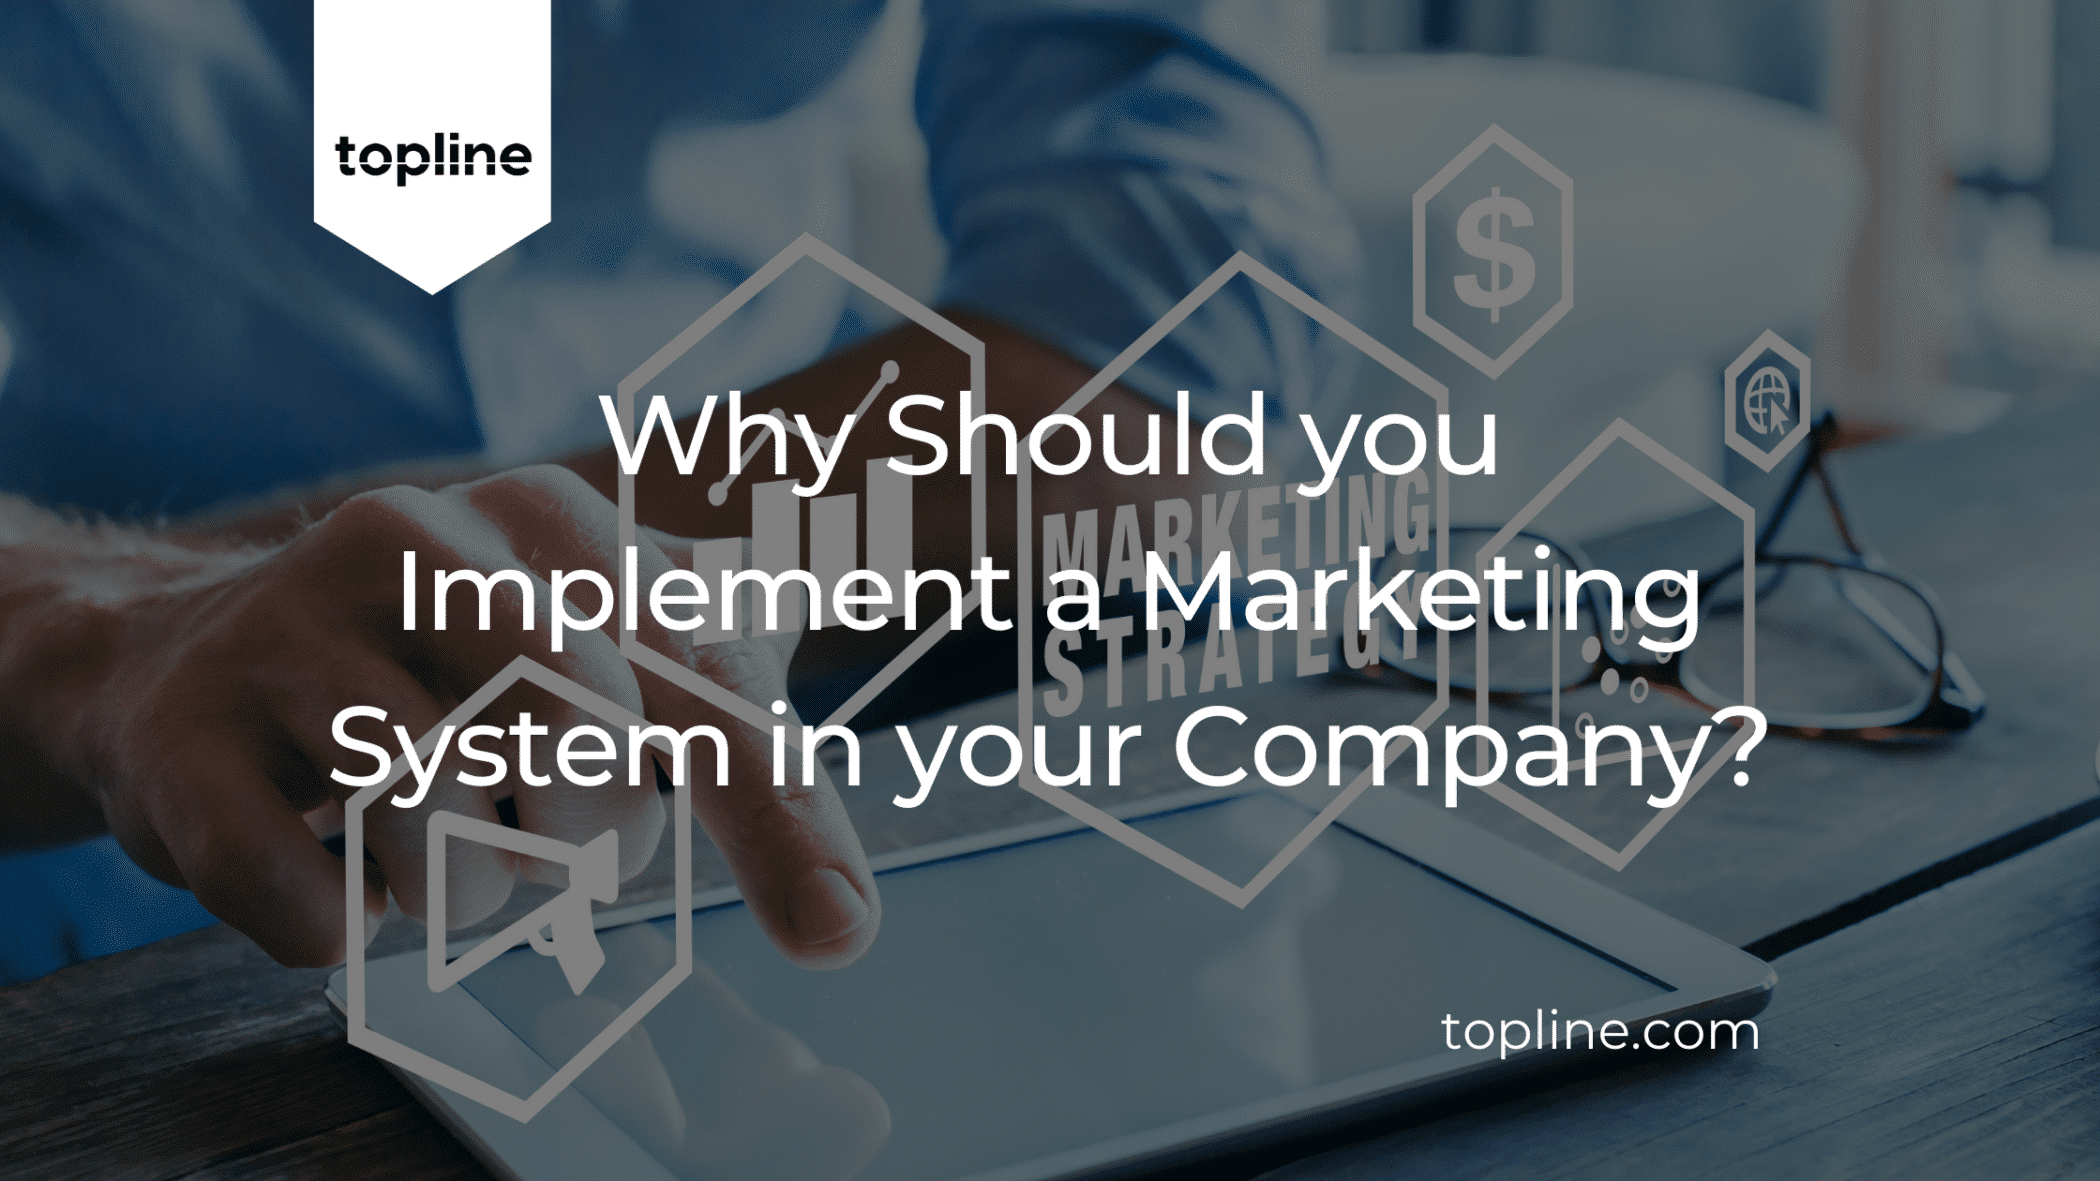 Why Should you Implement a Marketing System in your company?